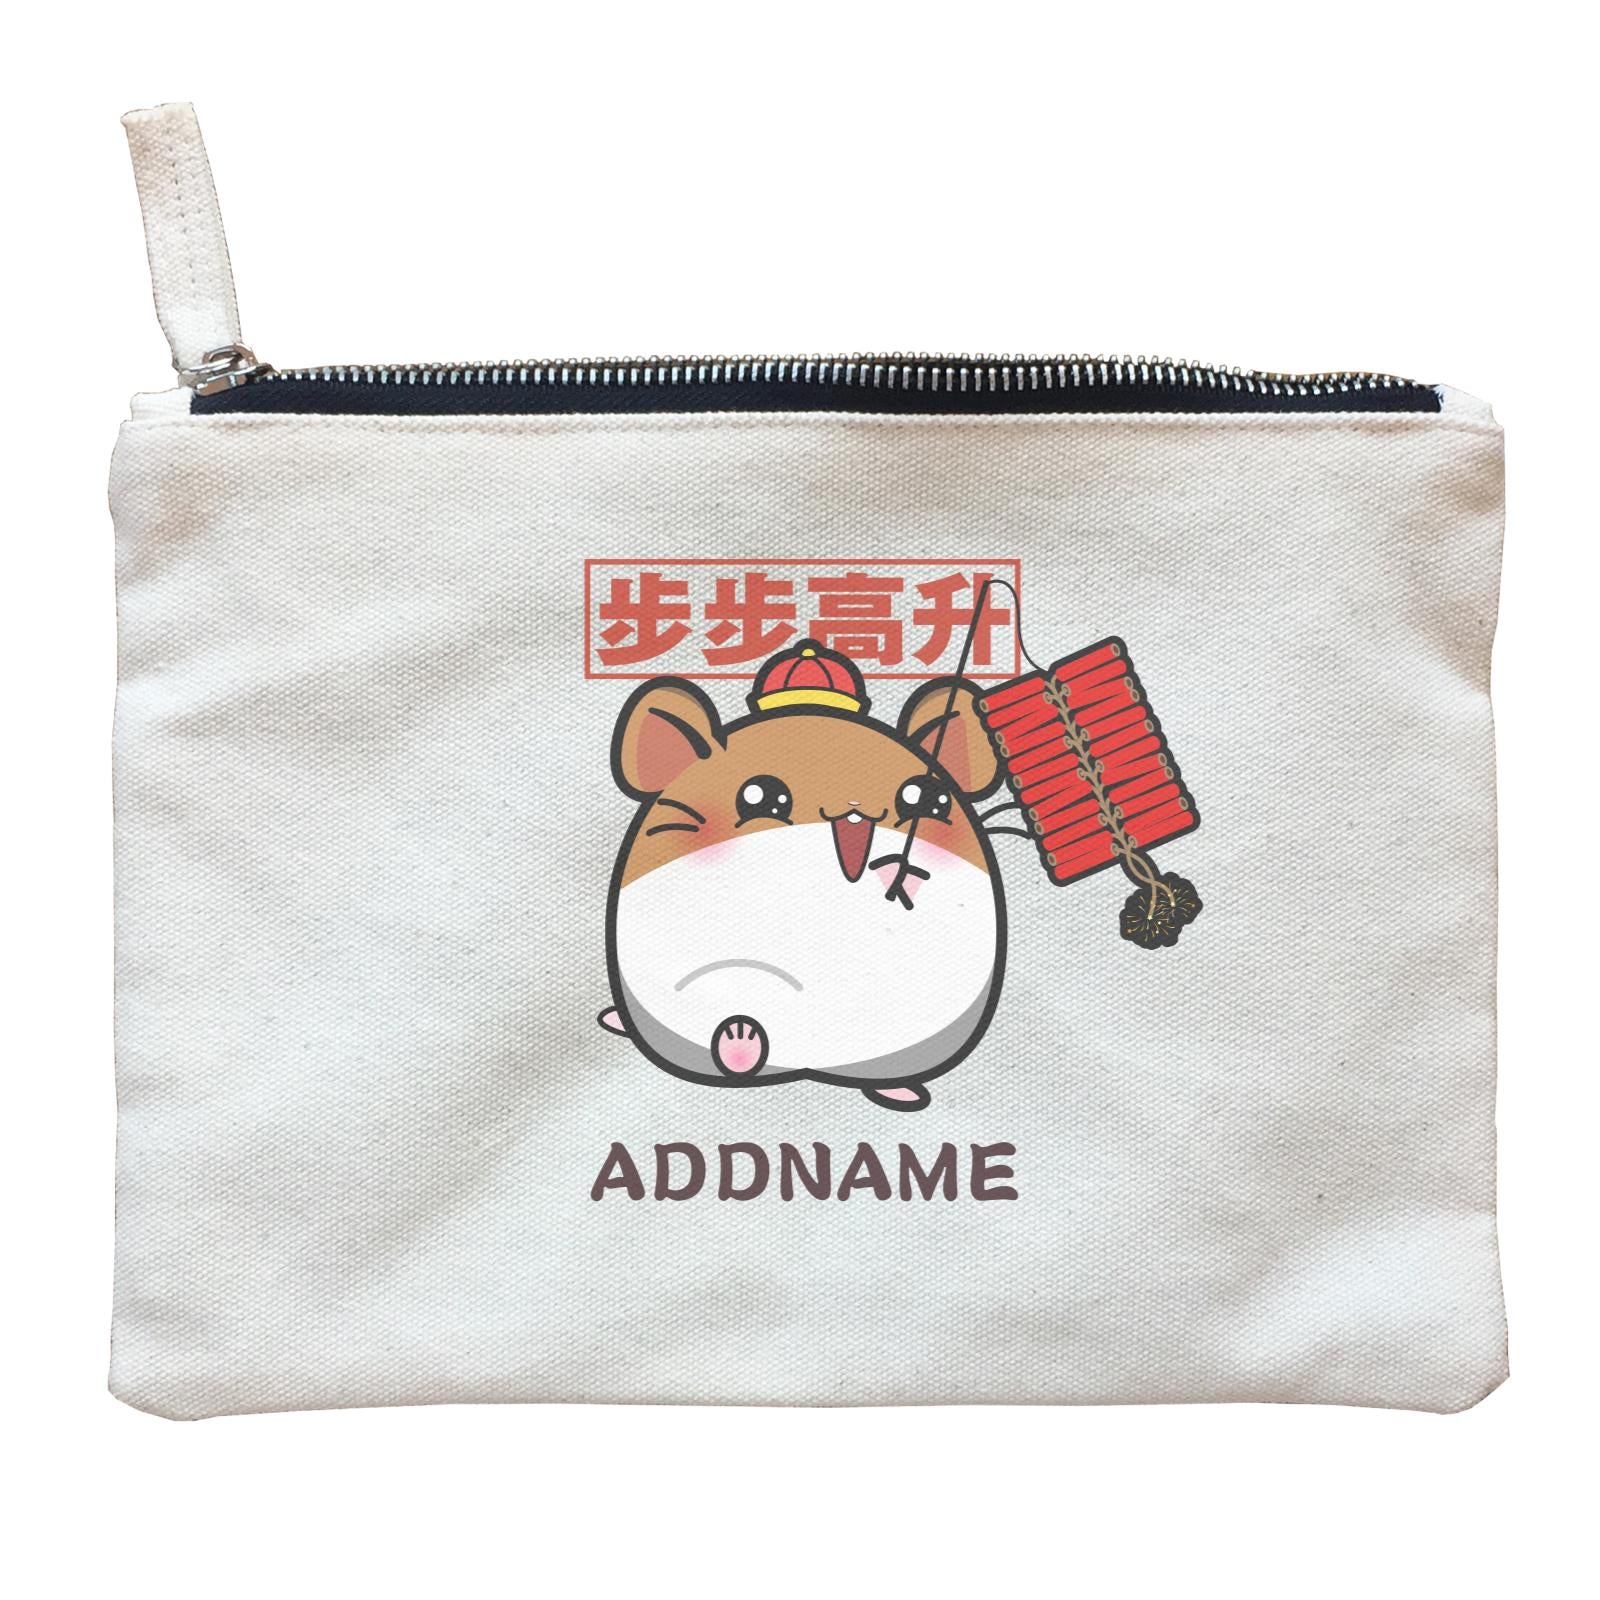 Prosperous Mouse Series Cracker Hamster Onwards And Upwards Accessories Zipper Pouch